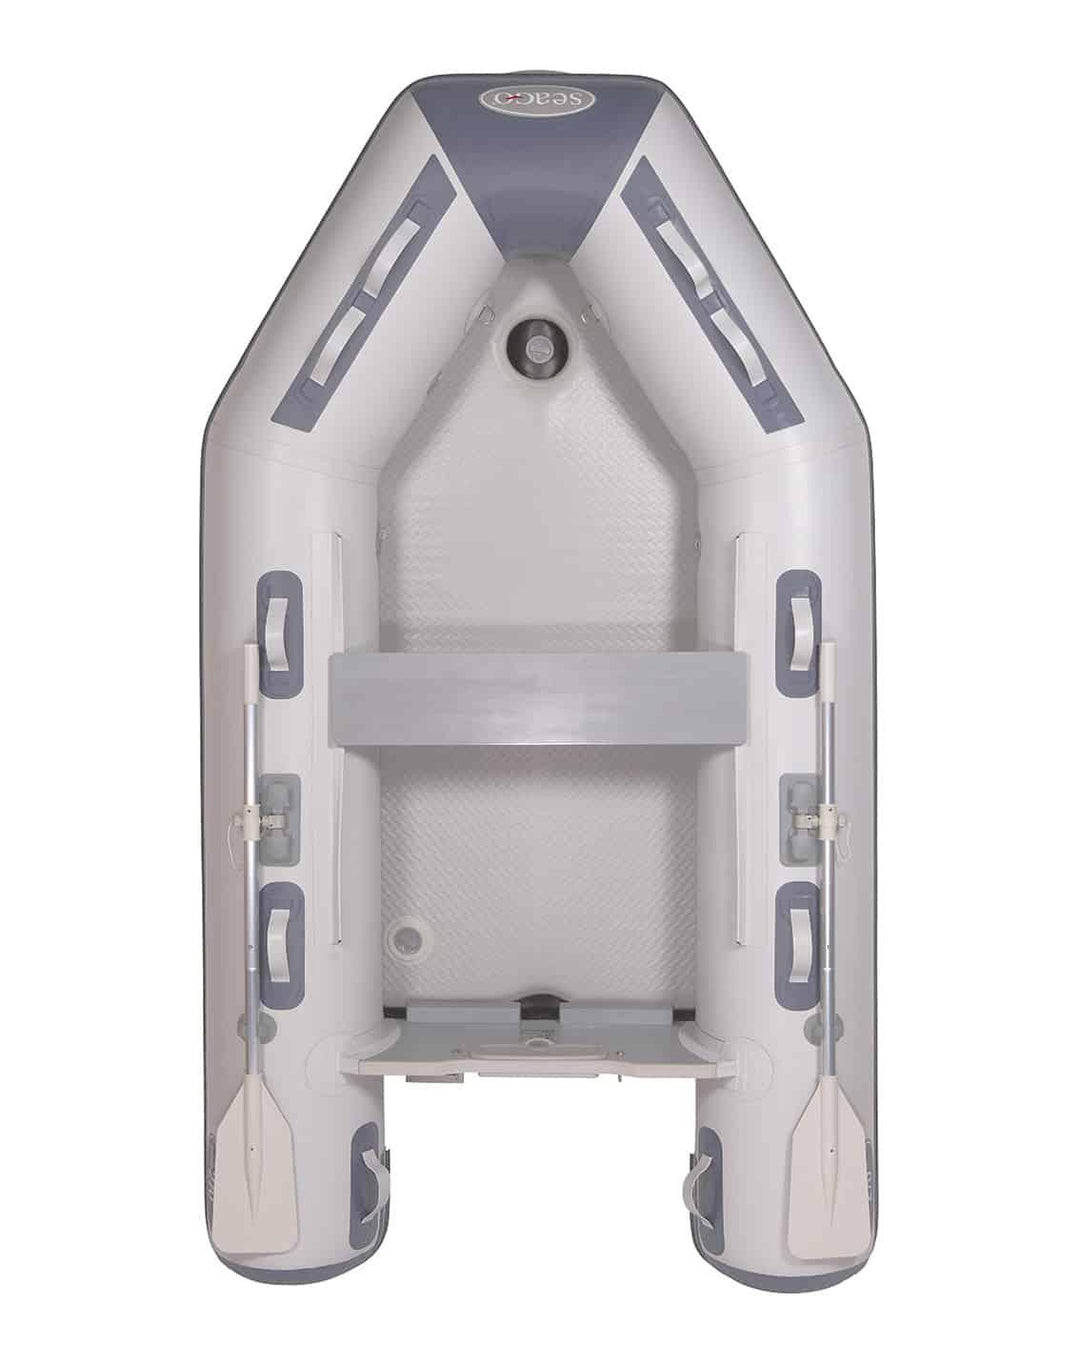 Seago Hypalon HY240 Inflatable Dinghy Airdeck - 4Boats